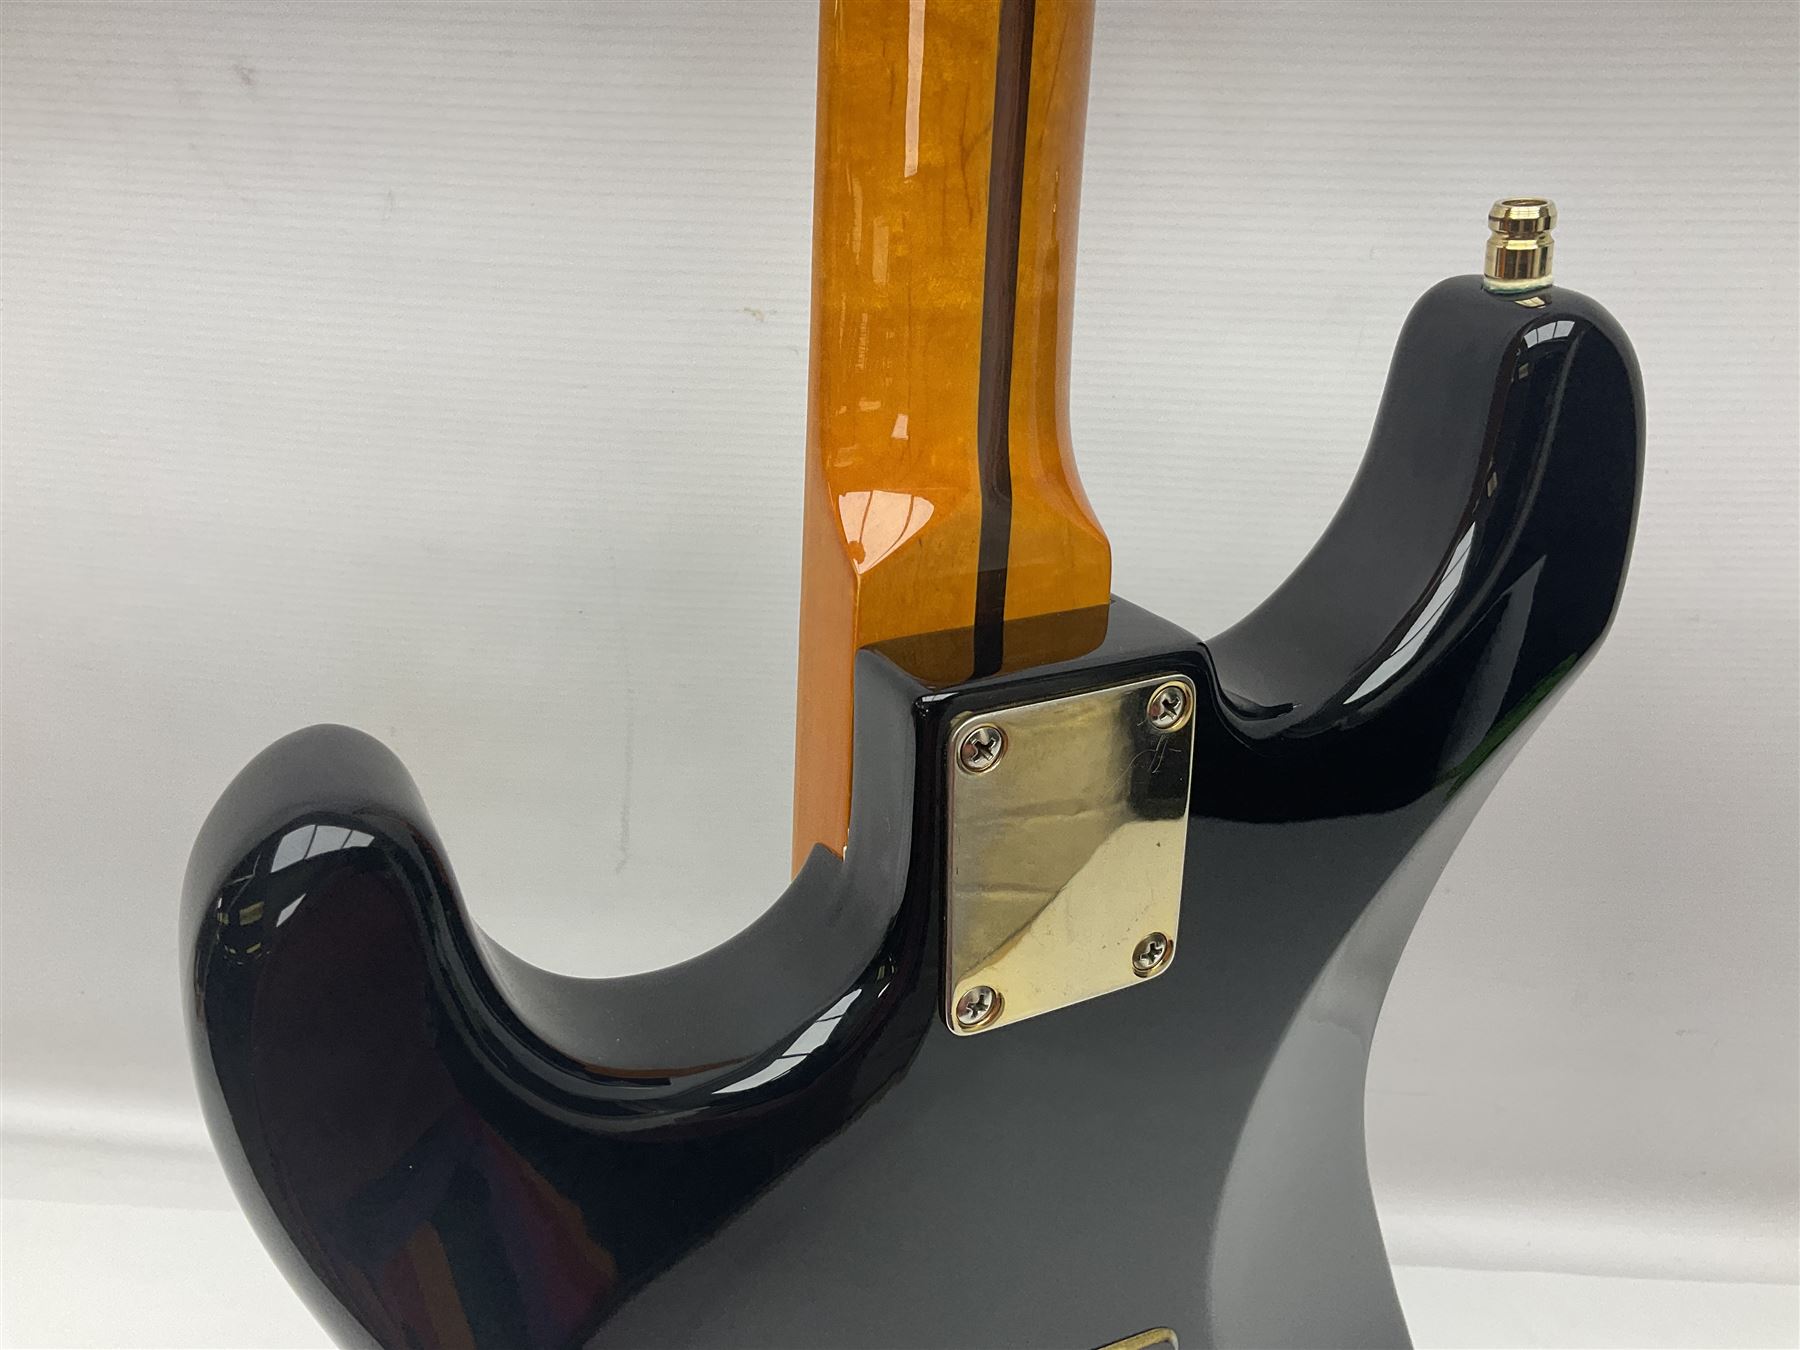 Copy of a Fender Stratocaster electric guitar in black with Wilkinson bridge - Image 12 of 21